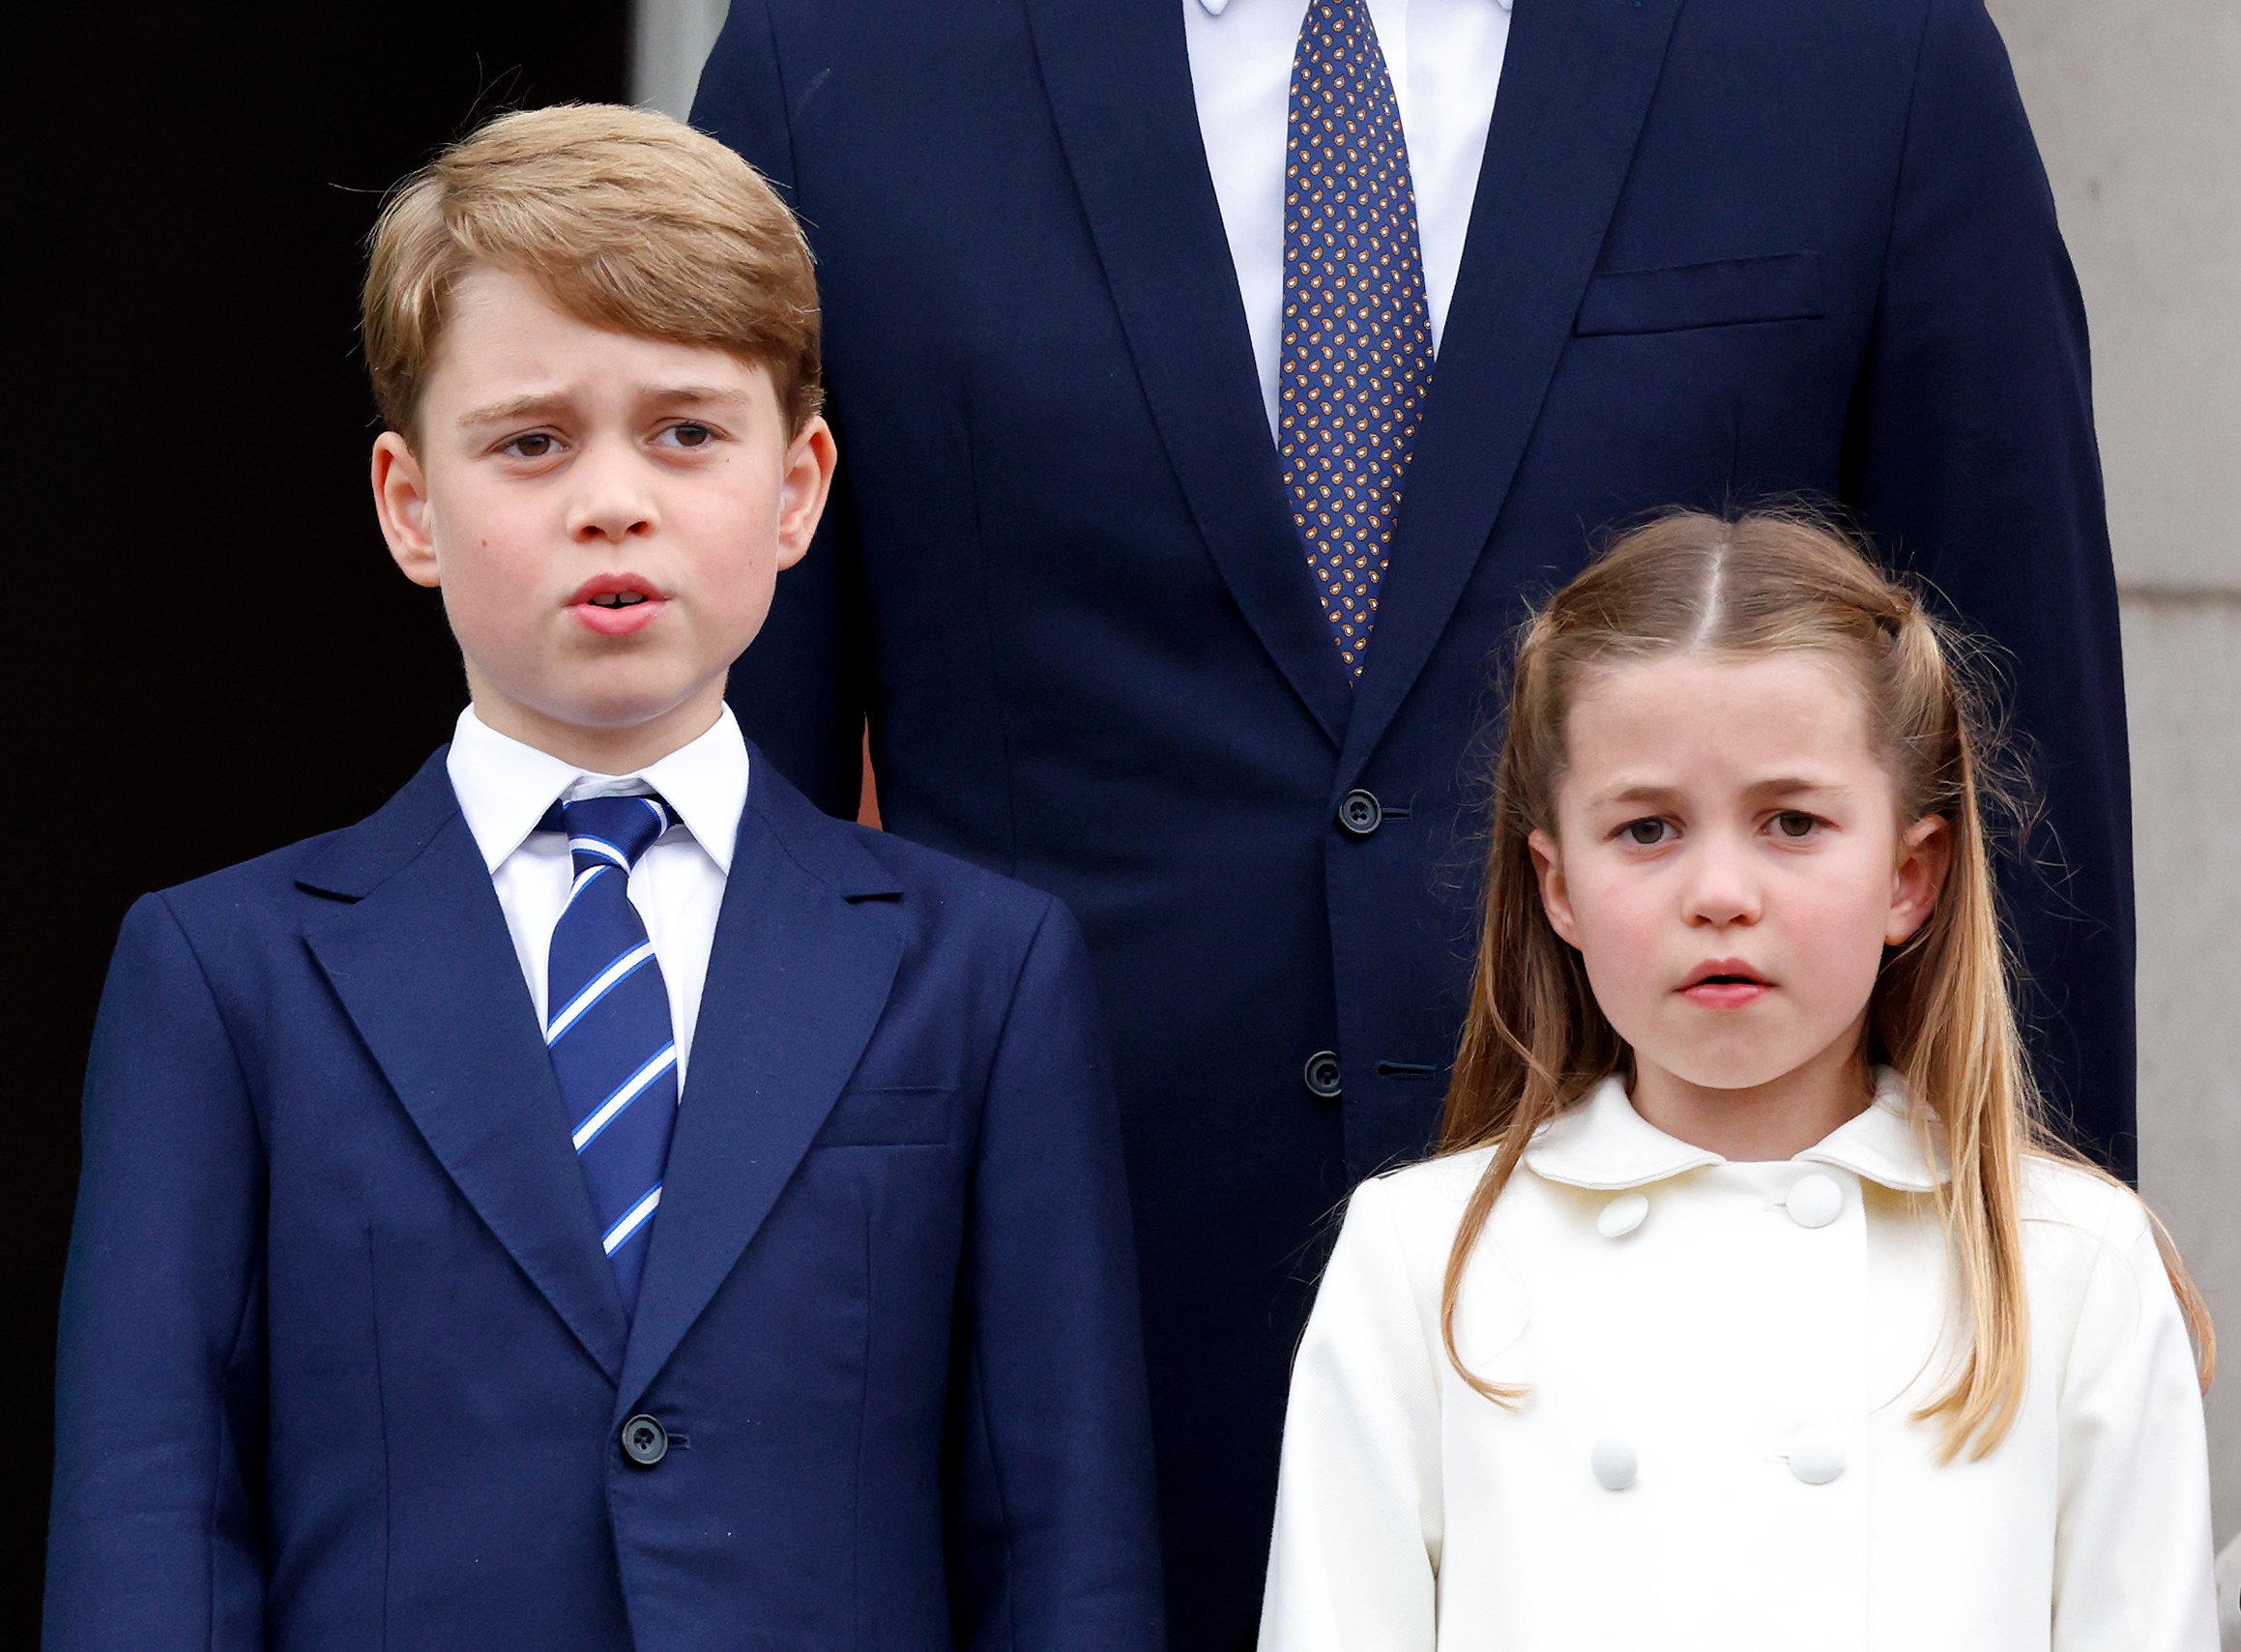 Prince George and Princess Charlotte stand on the balcony of Buckingham Palace following the Platinum Pageant on June 5, 2022 in London, England. | Source: Getty Images